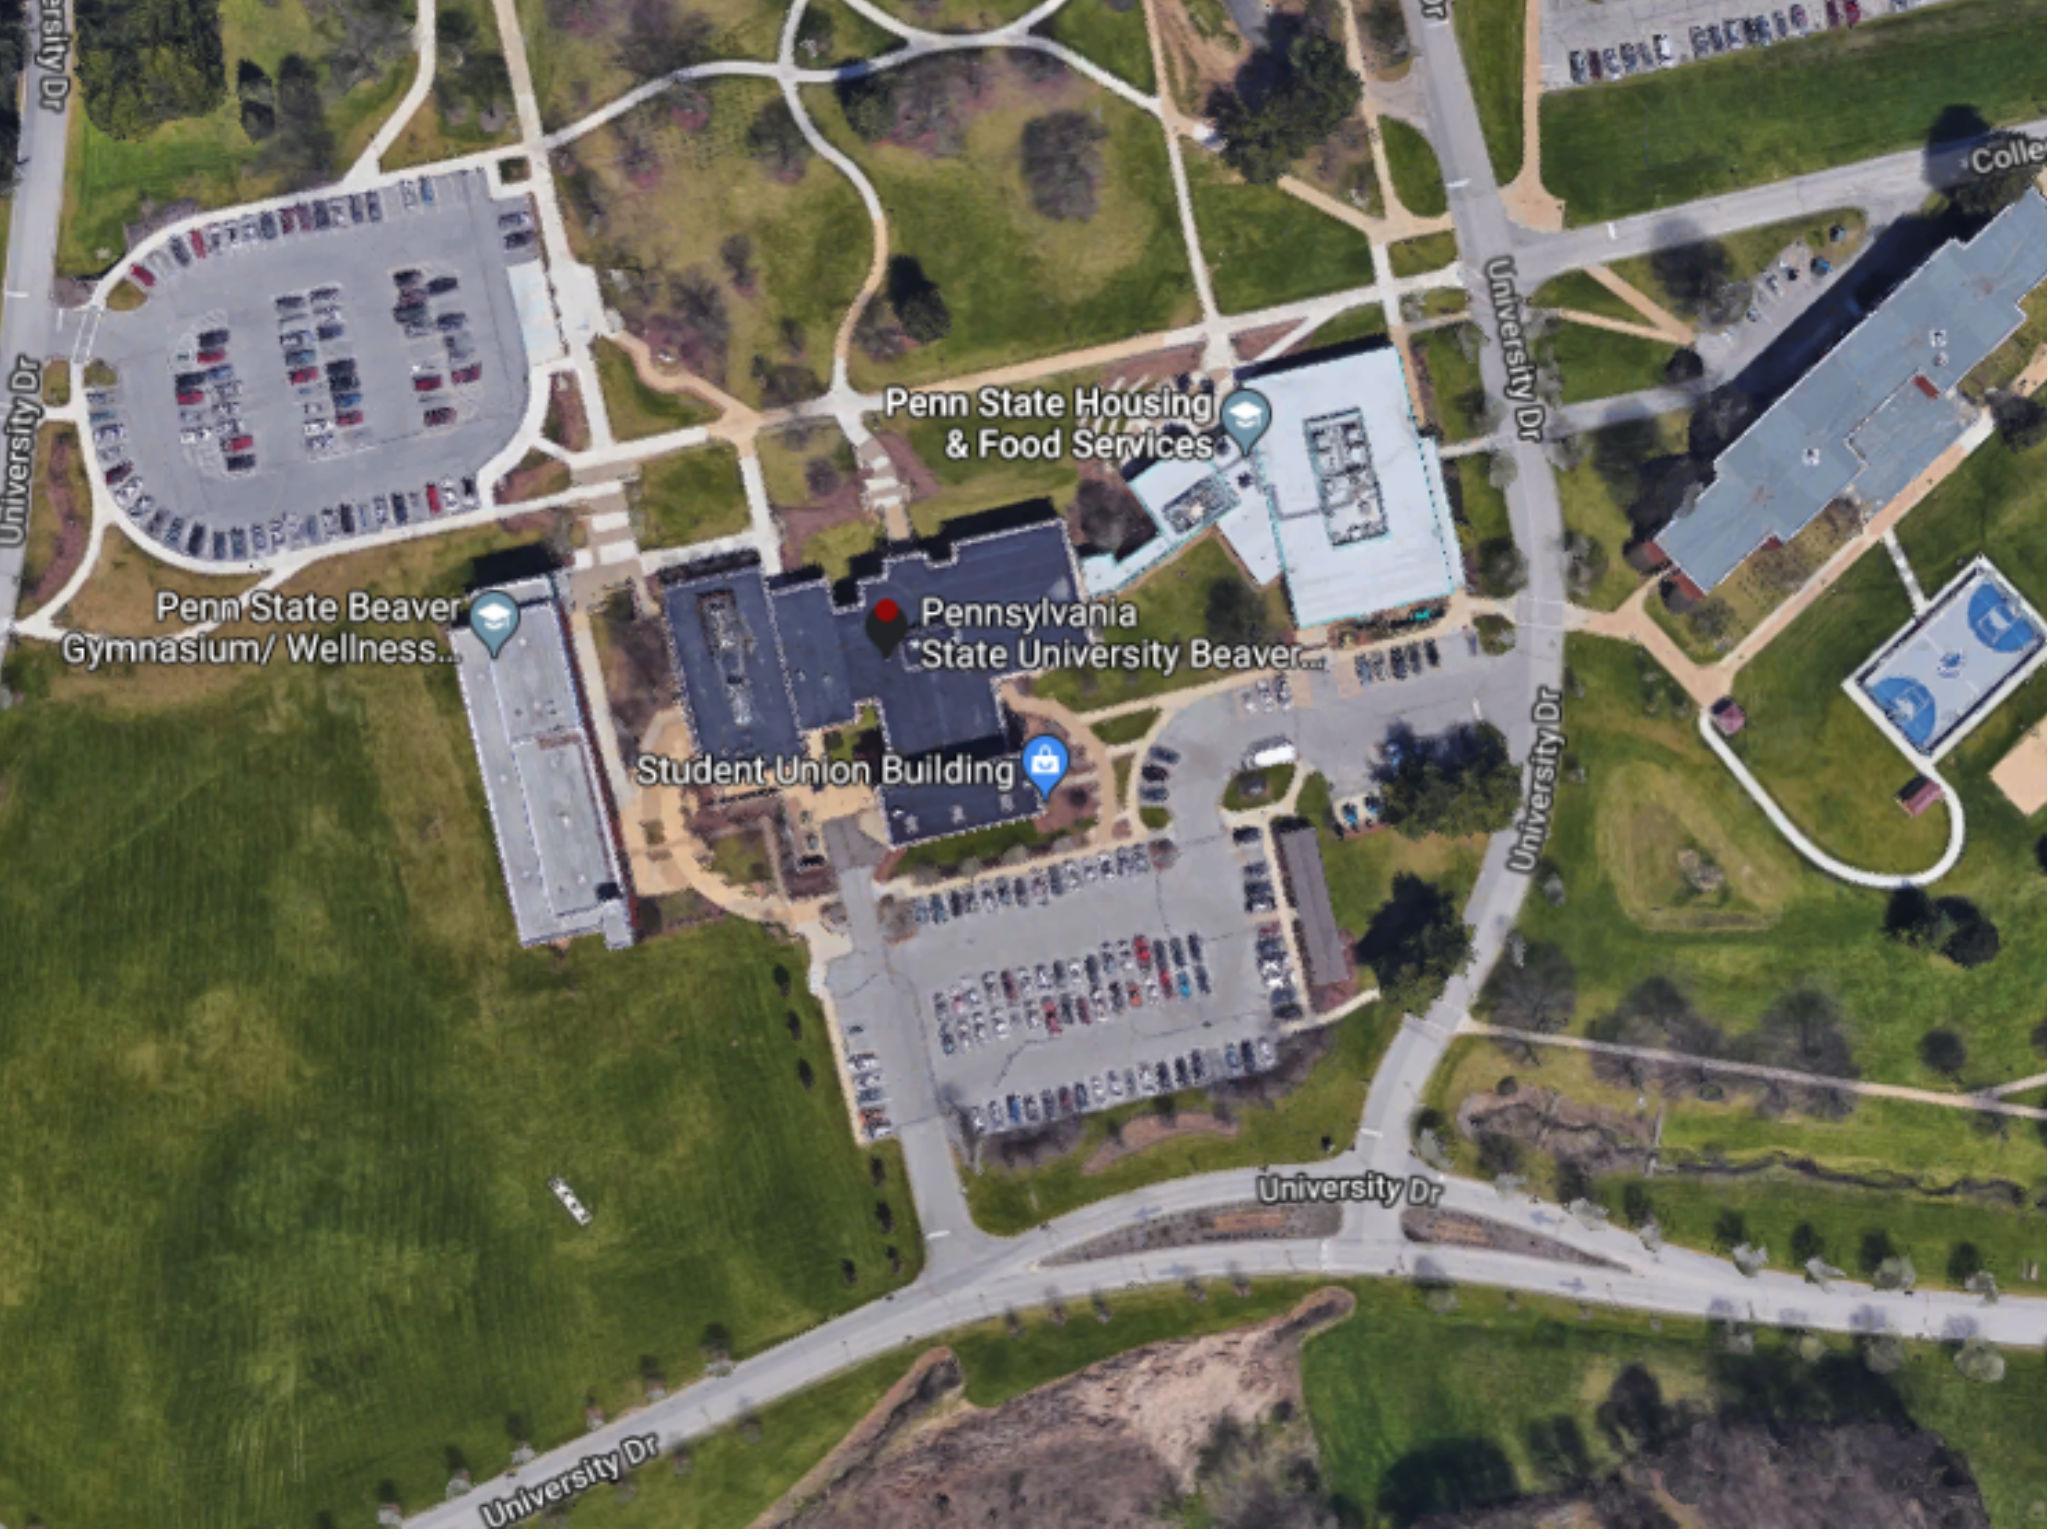 An aerial view of the Penn State satellite campus